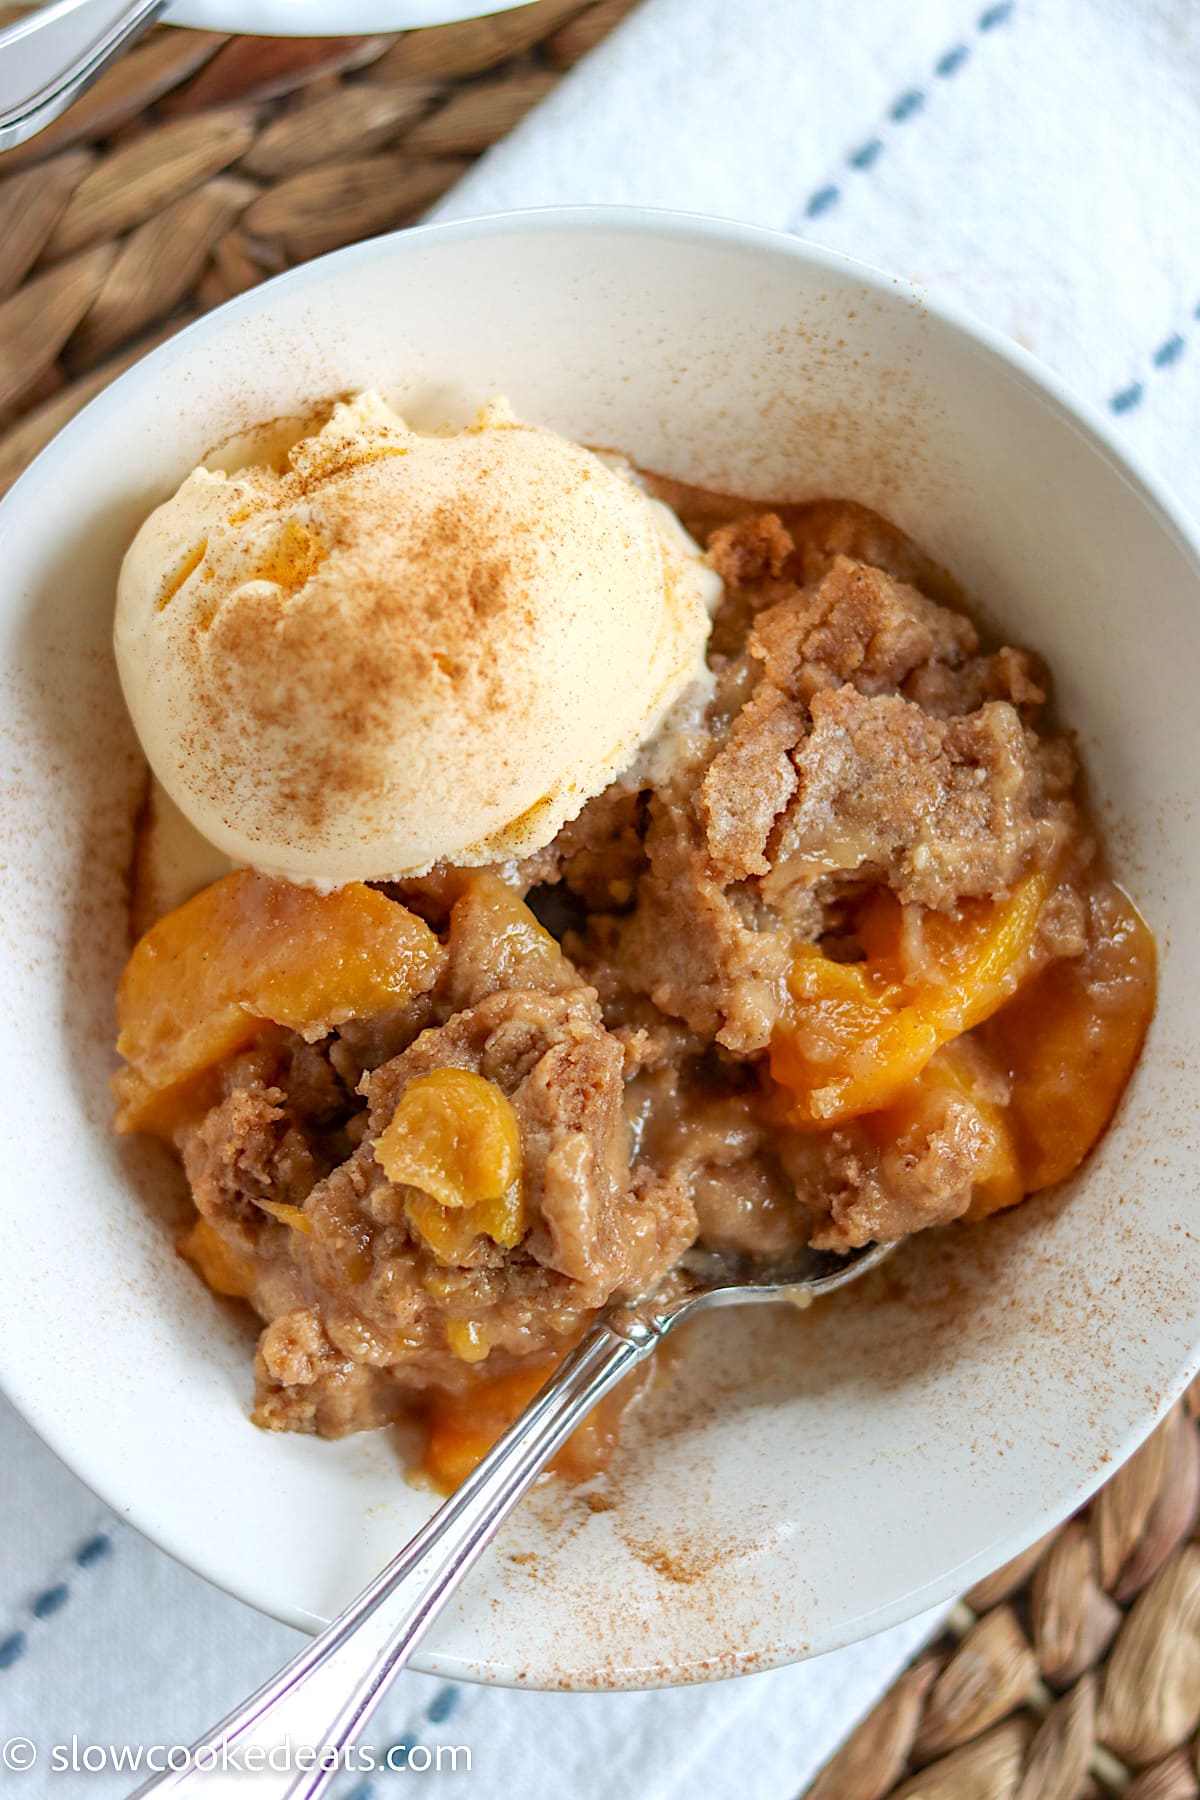 A white bowl of peach cobbler with vanilla ice cream sprinkled with cinnamon.